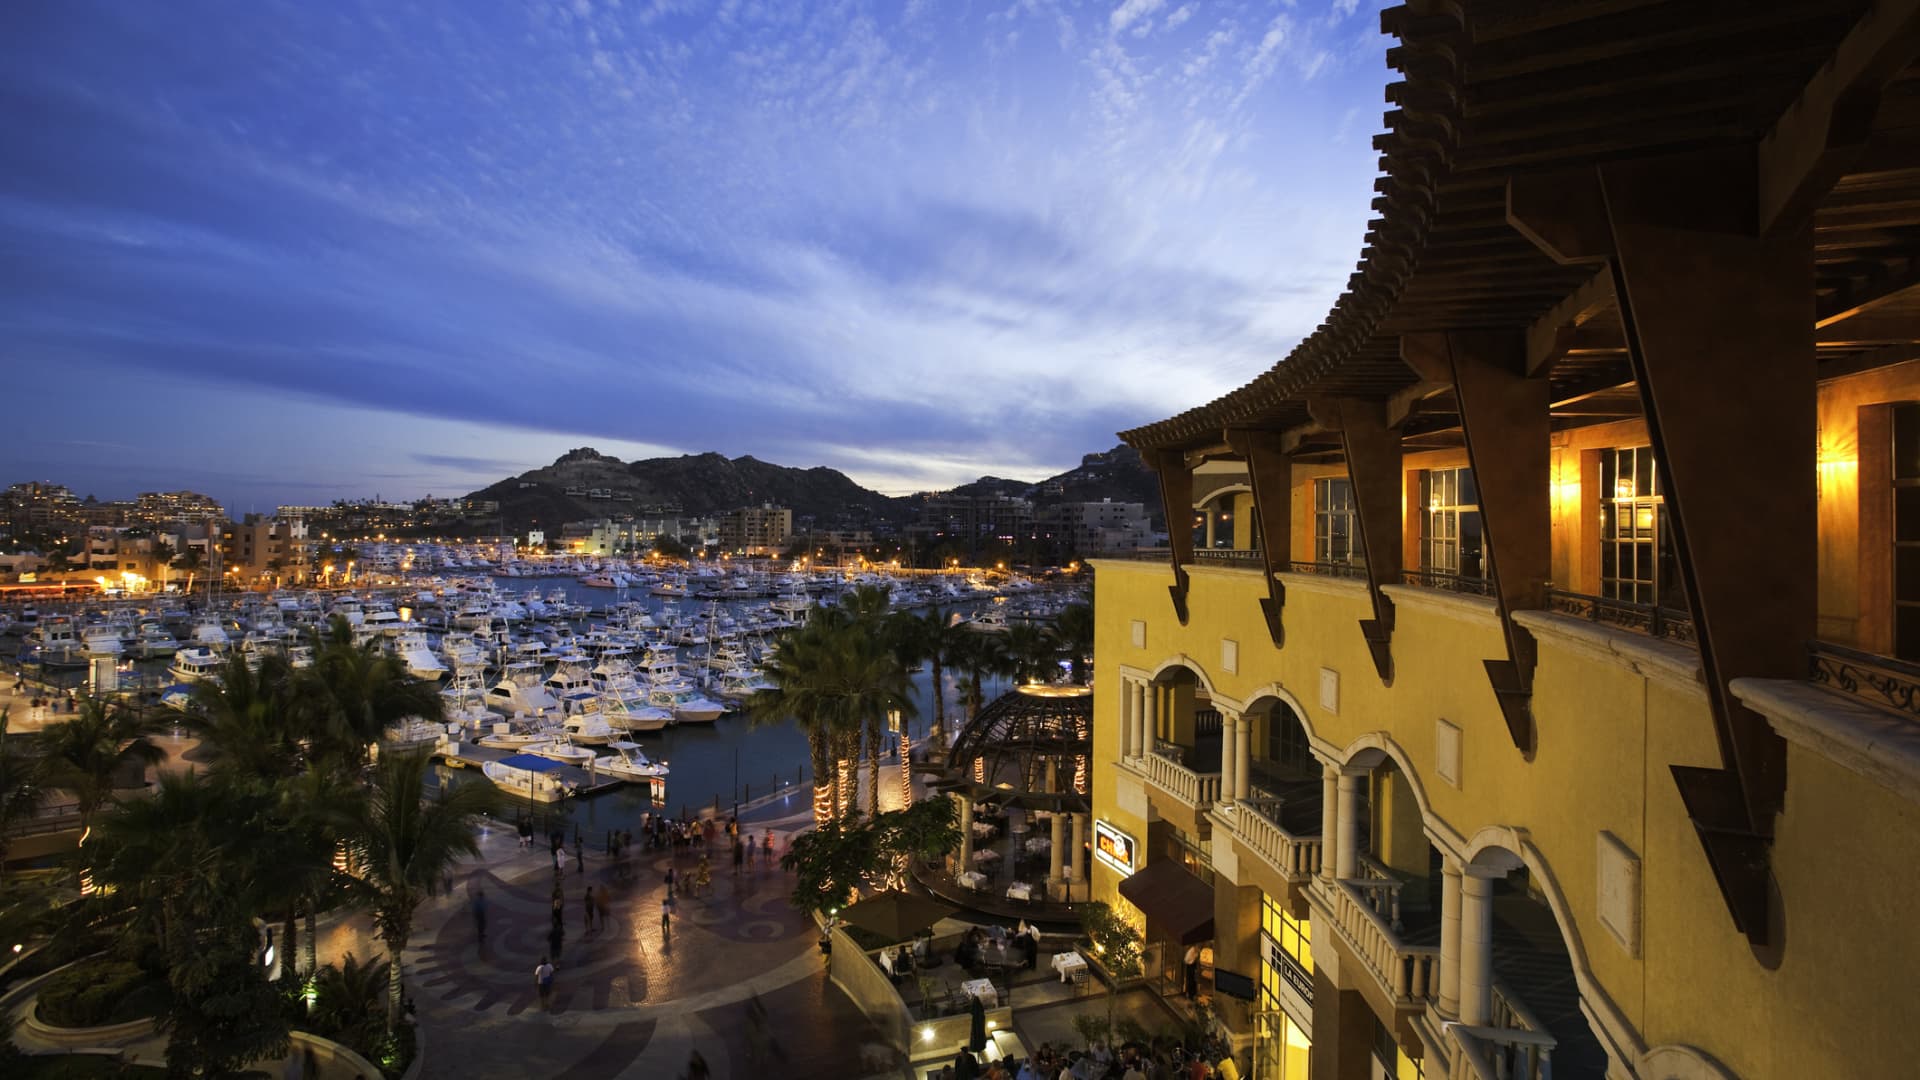 Joshua Bush, CEO of Avenue Two Travel, said his company booked many travelers to Cabo San Lucas, Mexico this year.